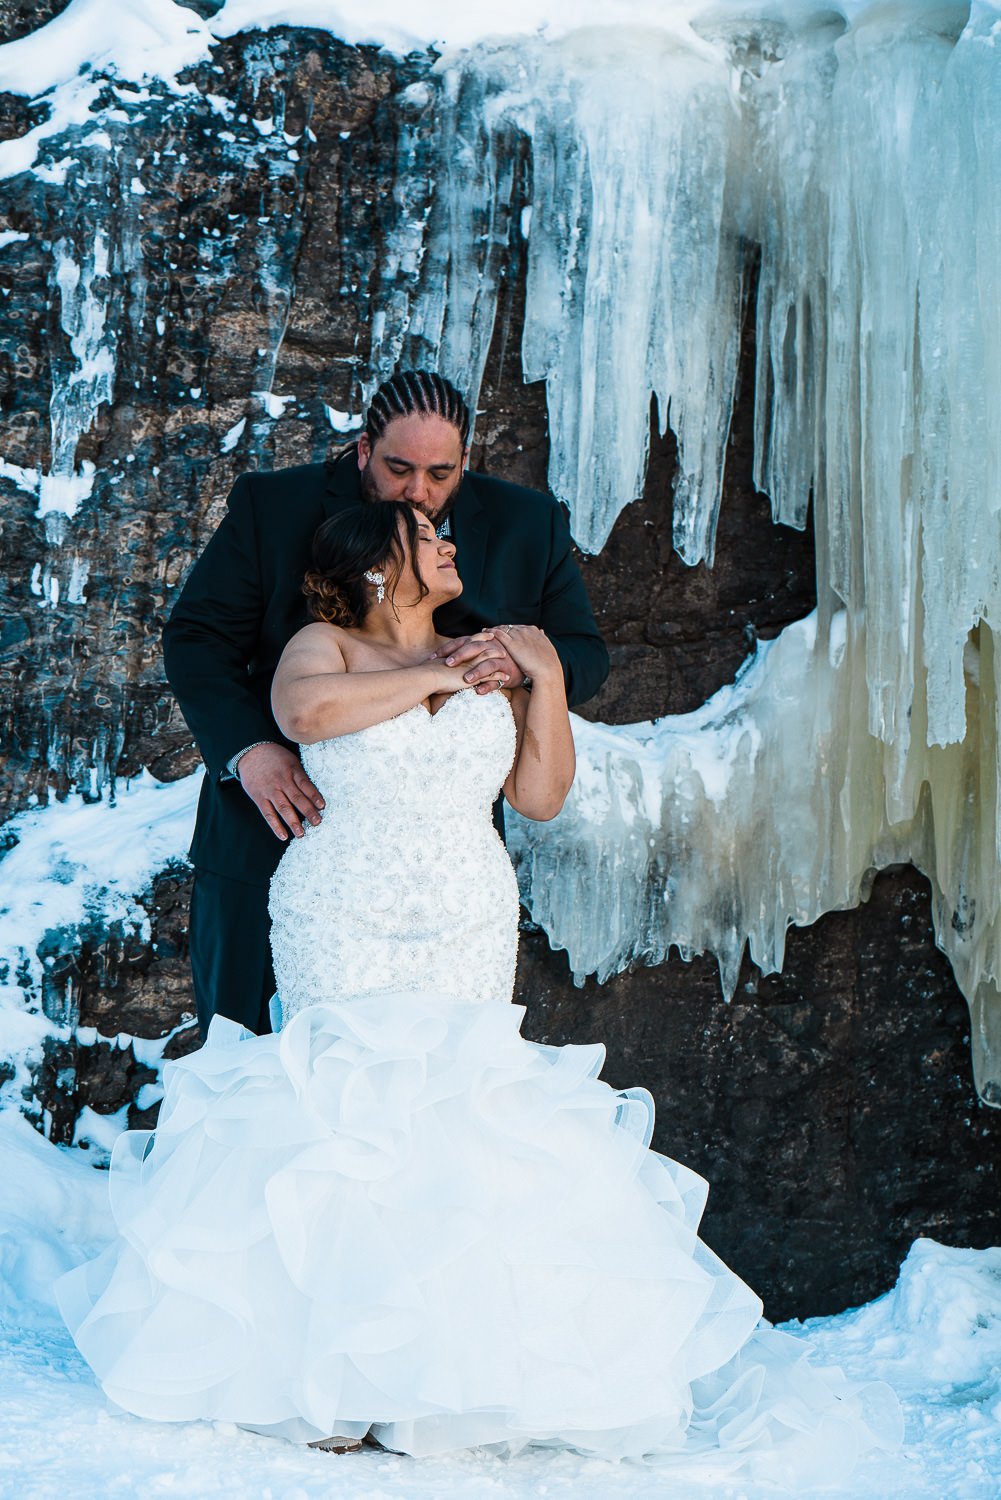 A couple in wedding attire standing before a majestic backdrop of towering icicles, capturing breathtaking elopement photos.